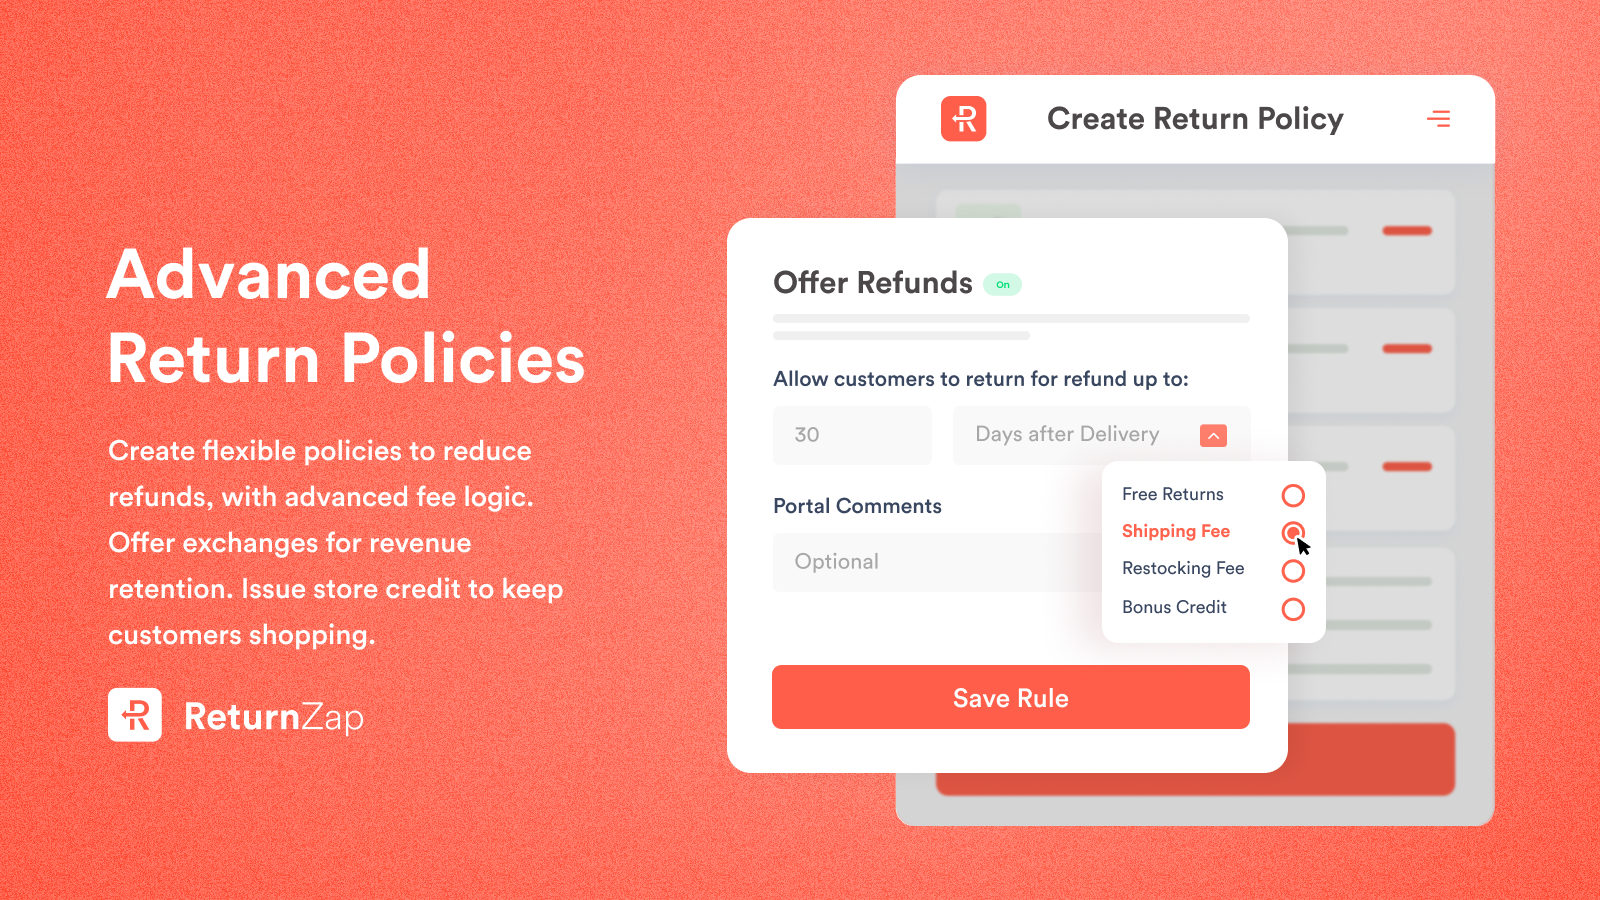 Advanced return policies with return fees, logic, and rules